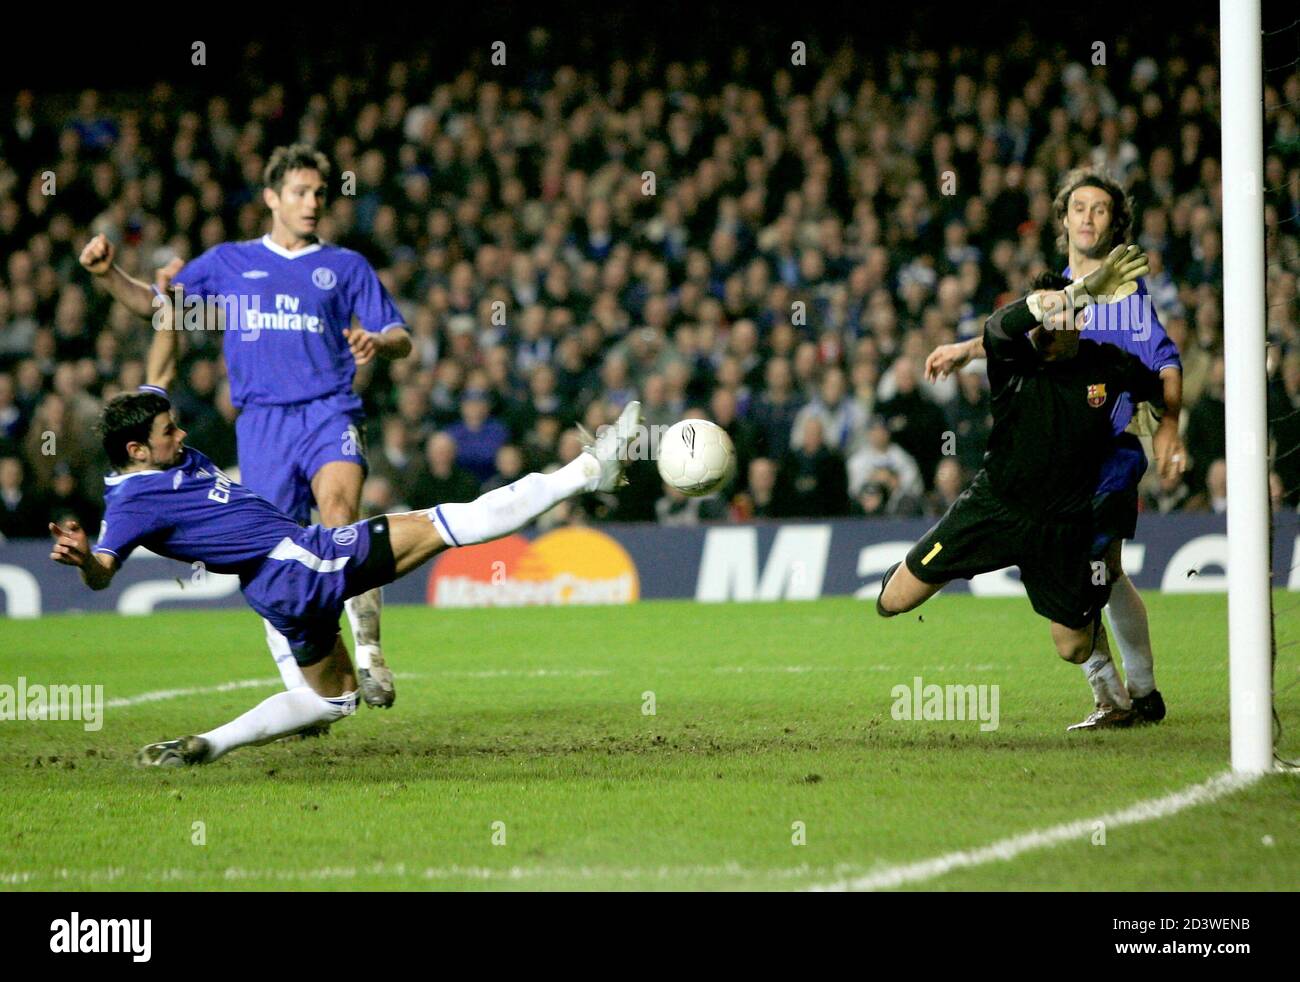 Chelsea S Mateja Kezman L Stretches For The Ball As Barcelona Goalkeeper Victor Valdes Fails To Save A Header By Chelsea Captain John Terry Not Pictured During Their Champions League First Knock Out Round